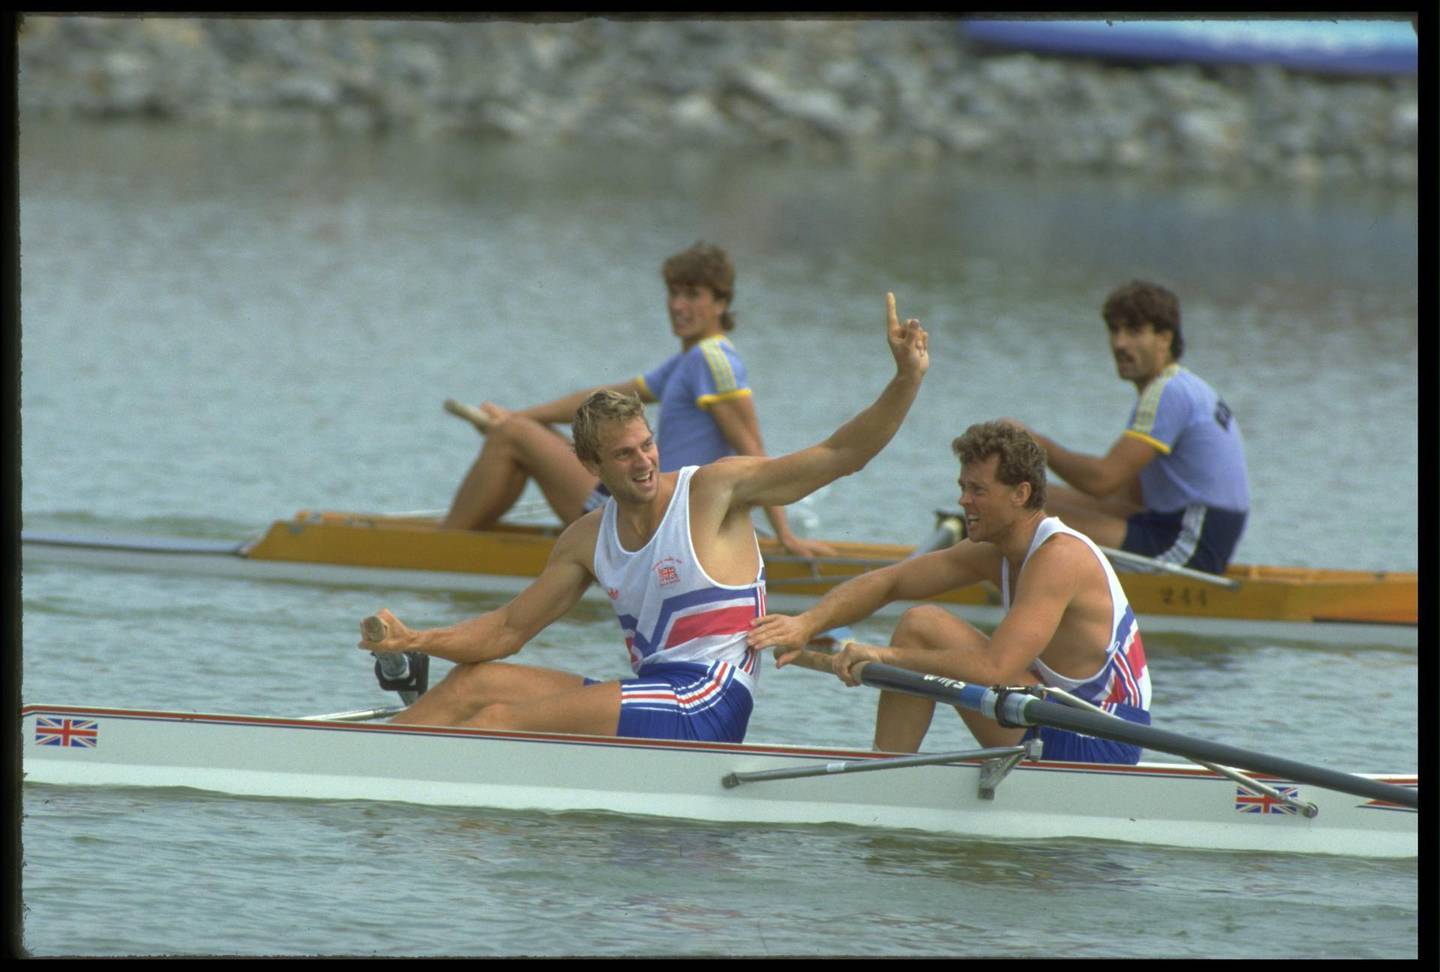 24 SEP 1988:  STEVEN REDGRAVE (LEFT) AND ANDREW HOLMES OF GREAT BRITAIN CELEBRATE AFTER WINNING THE COXLESS PAIRS ROWING EVENT AT THE 1988 SEOUL OLYMPICS.  Mandatory Credit:  ALLSPORT/SIMON BRUTY